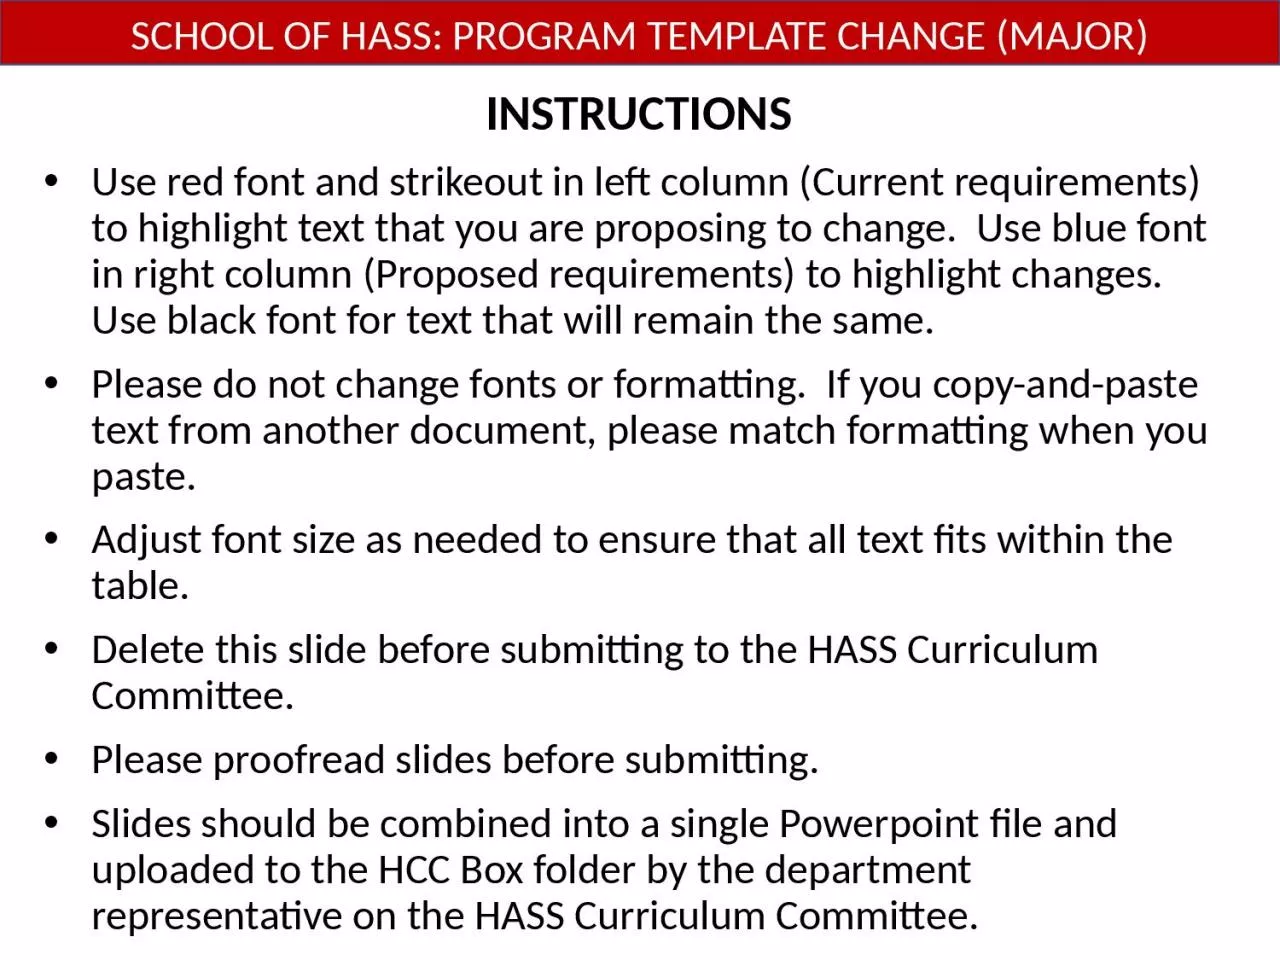 INSTRUCTIONS Use red font and strikeout in left column (Current requirements) to highlight